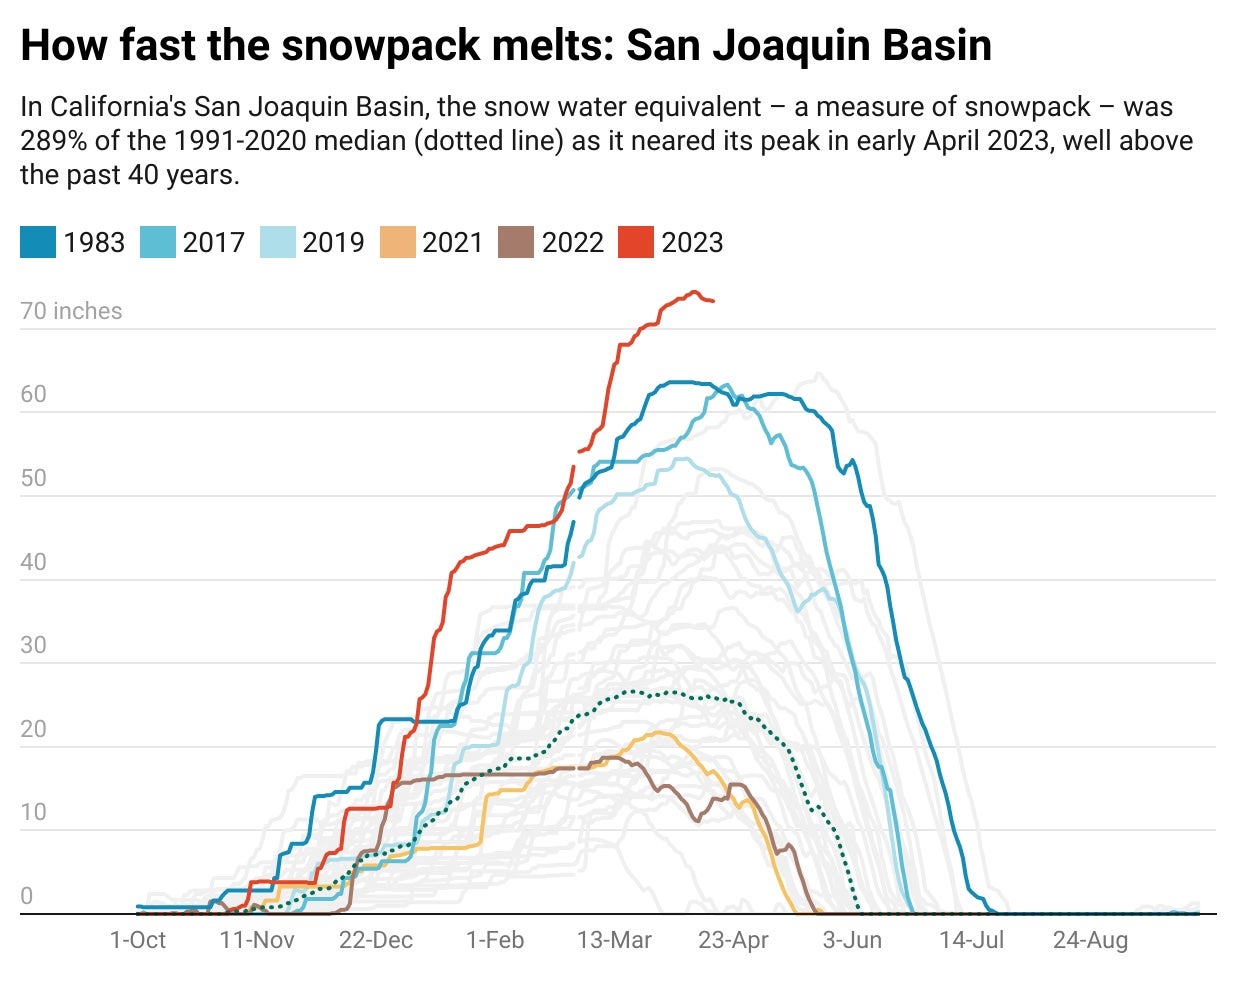 Line chart shows how much the snowpack in the San Joaquin Basin melted each year since 1983, with the peak of 74.4 inches occurring in early April 2023.